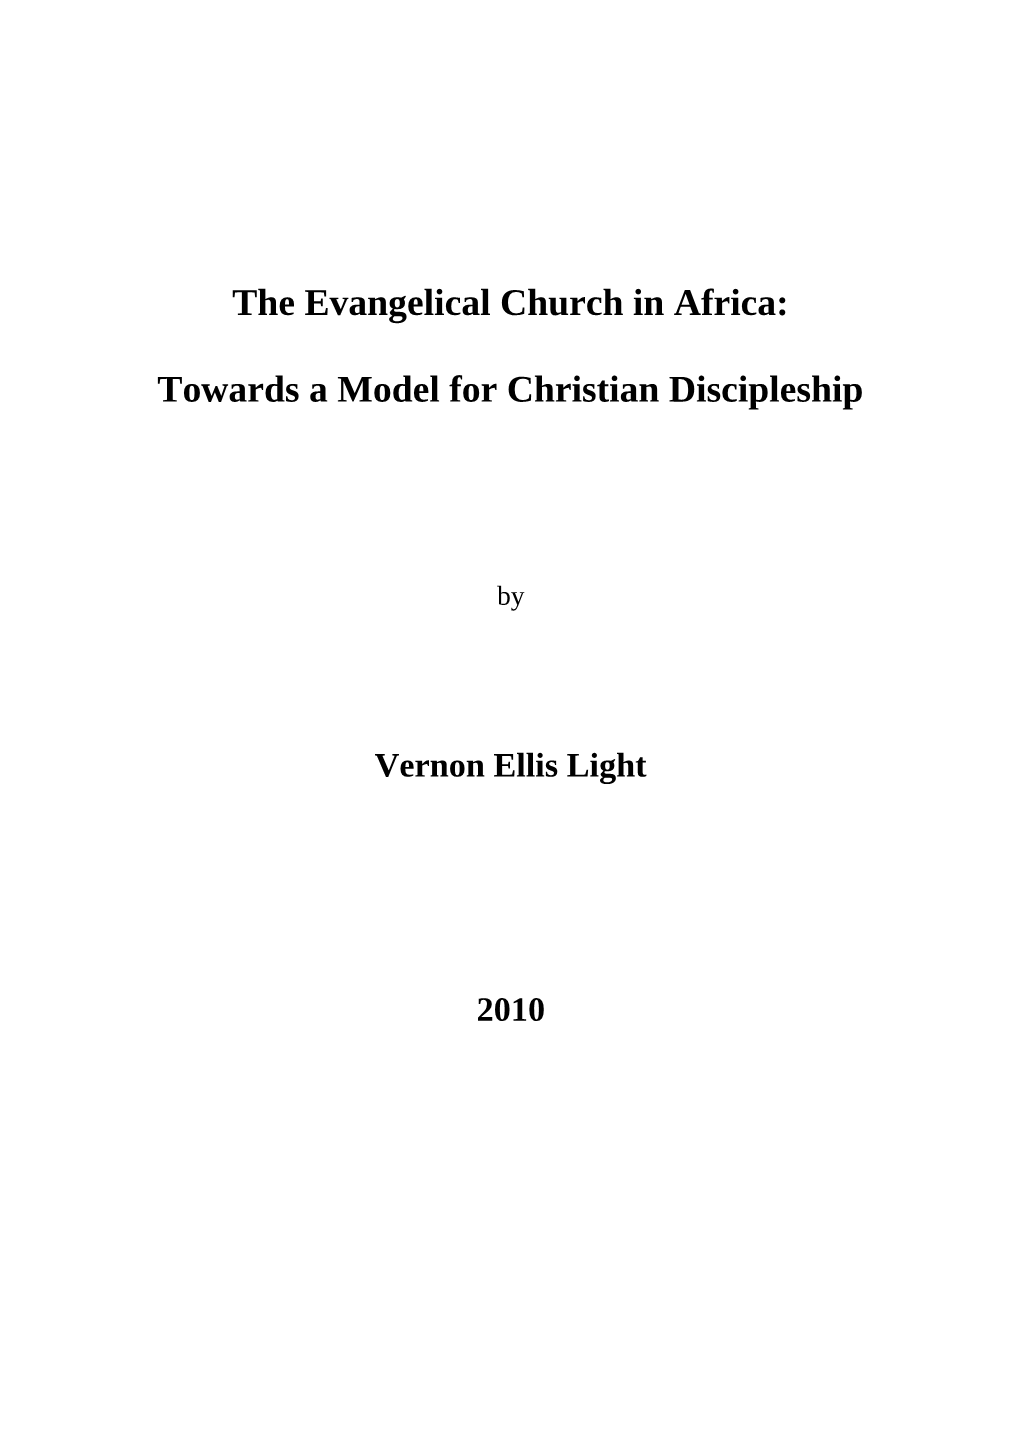 The Evangelical Church in Africa: Towards a Model for Christian